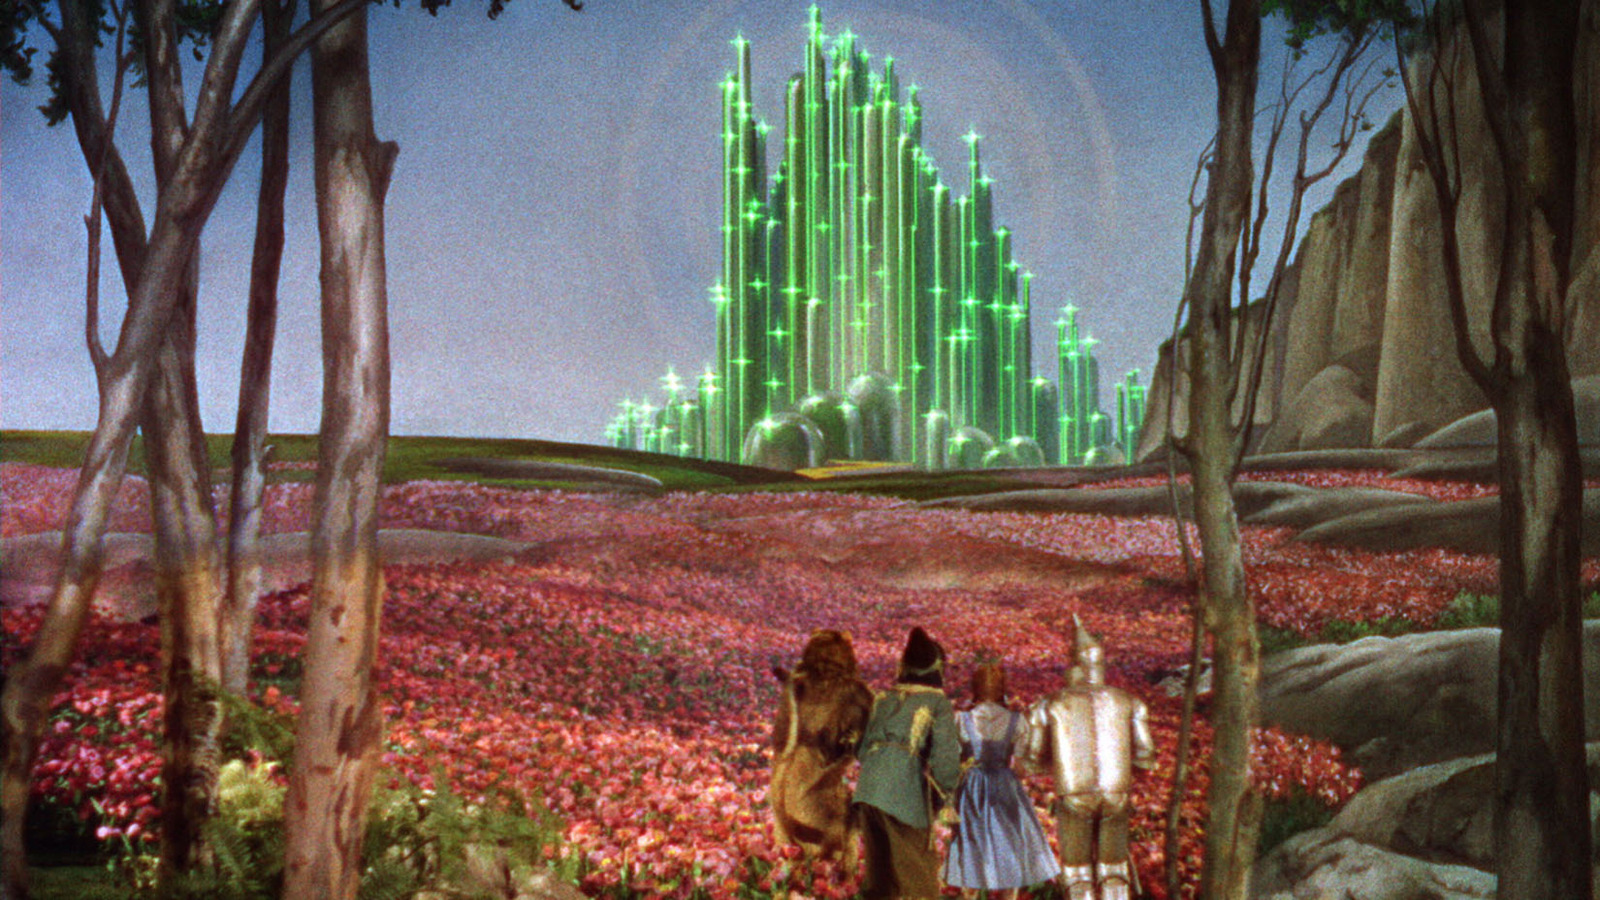 What It Was Really Like To See The Wizard Of Oz In 1939 - Celeb 99